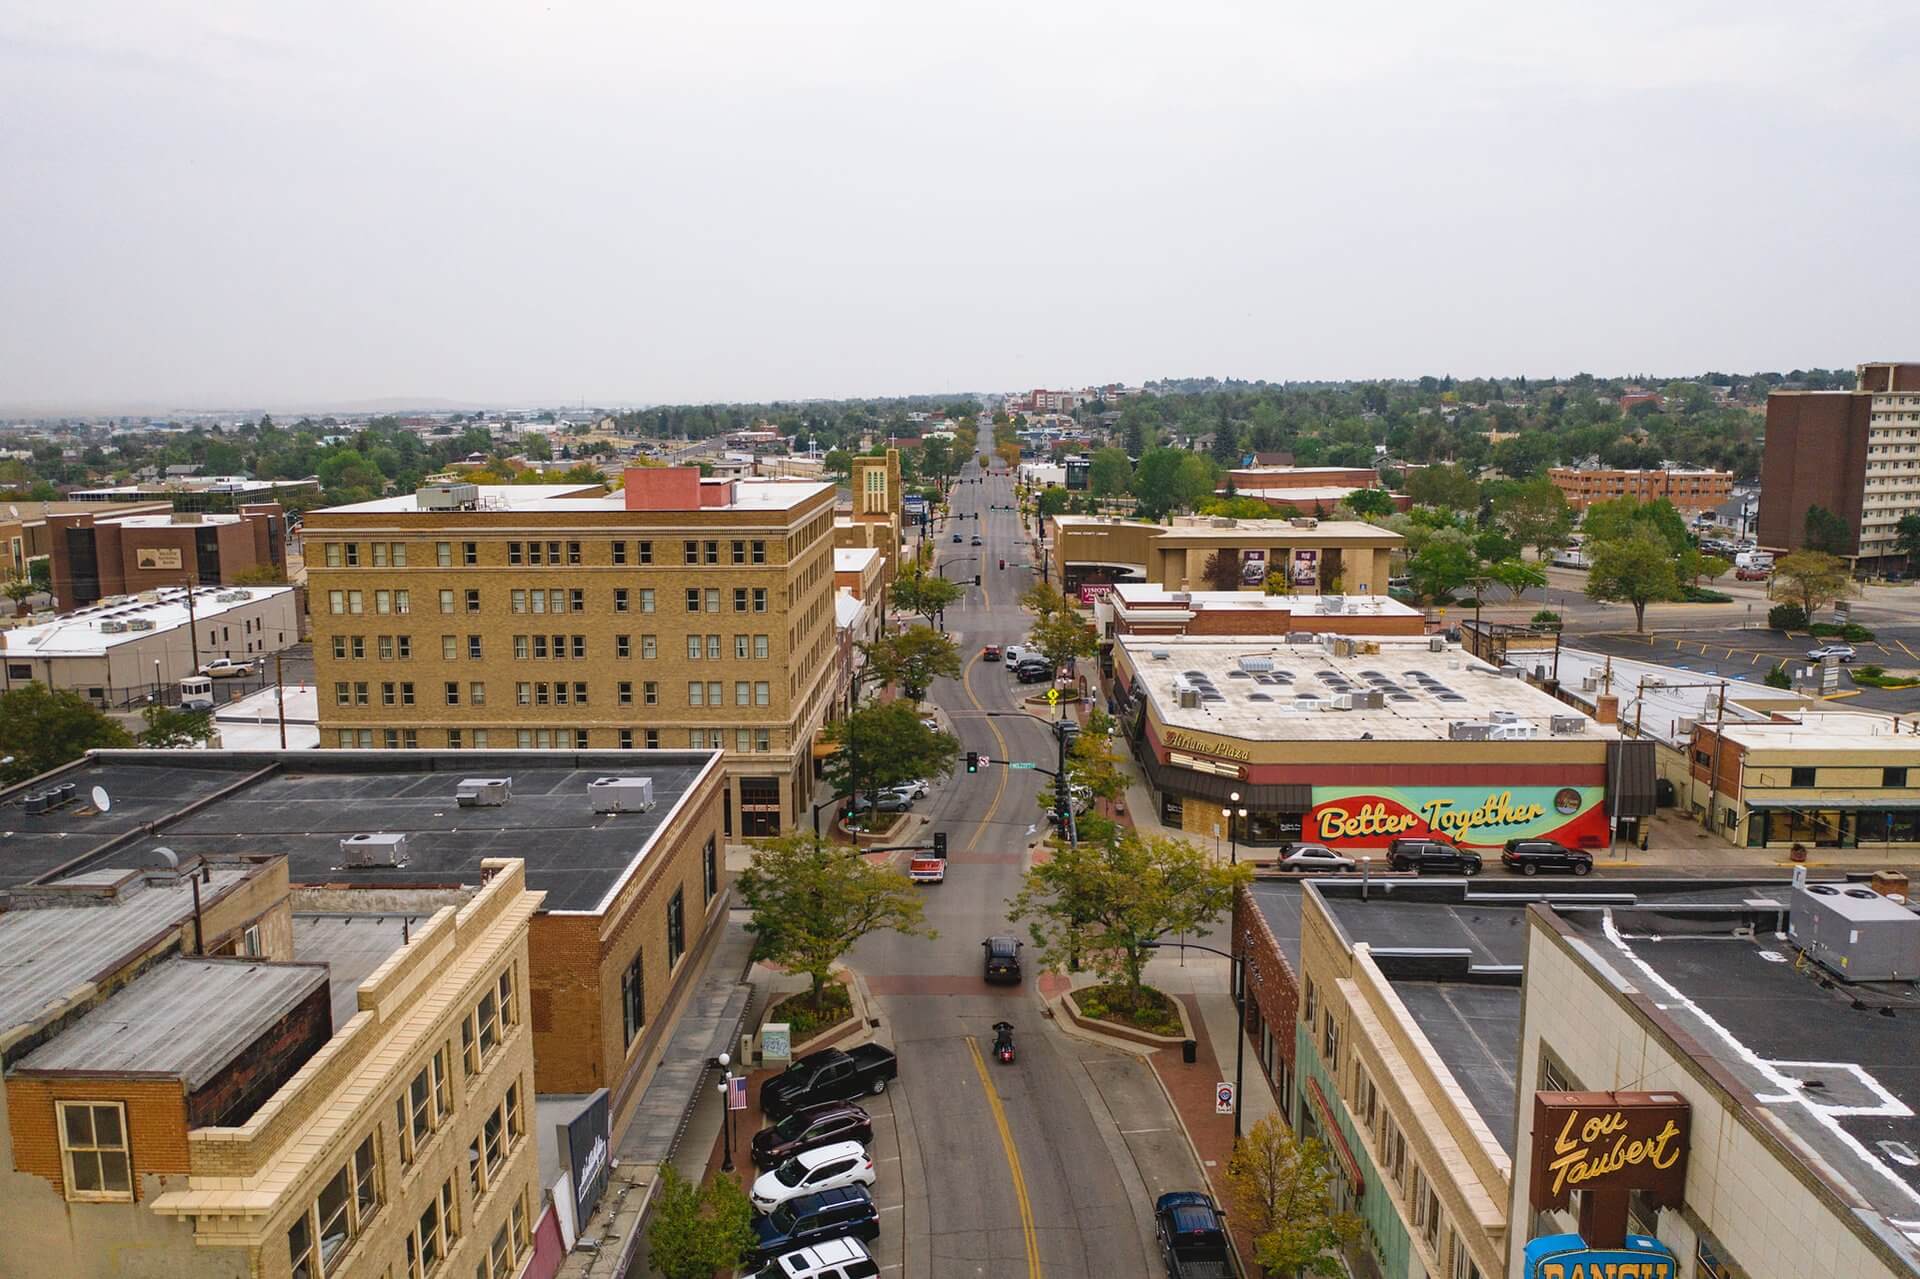 15 Facts About Innovations And Technological Advances In Casper Wyoming 